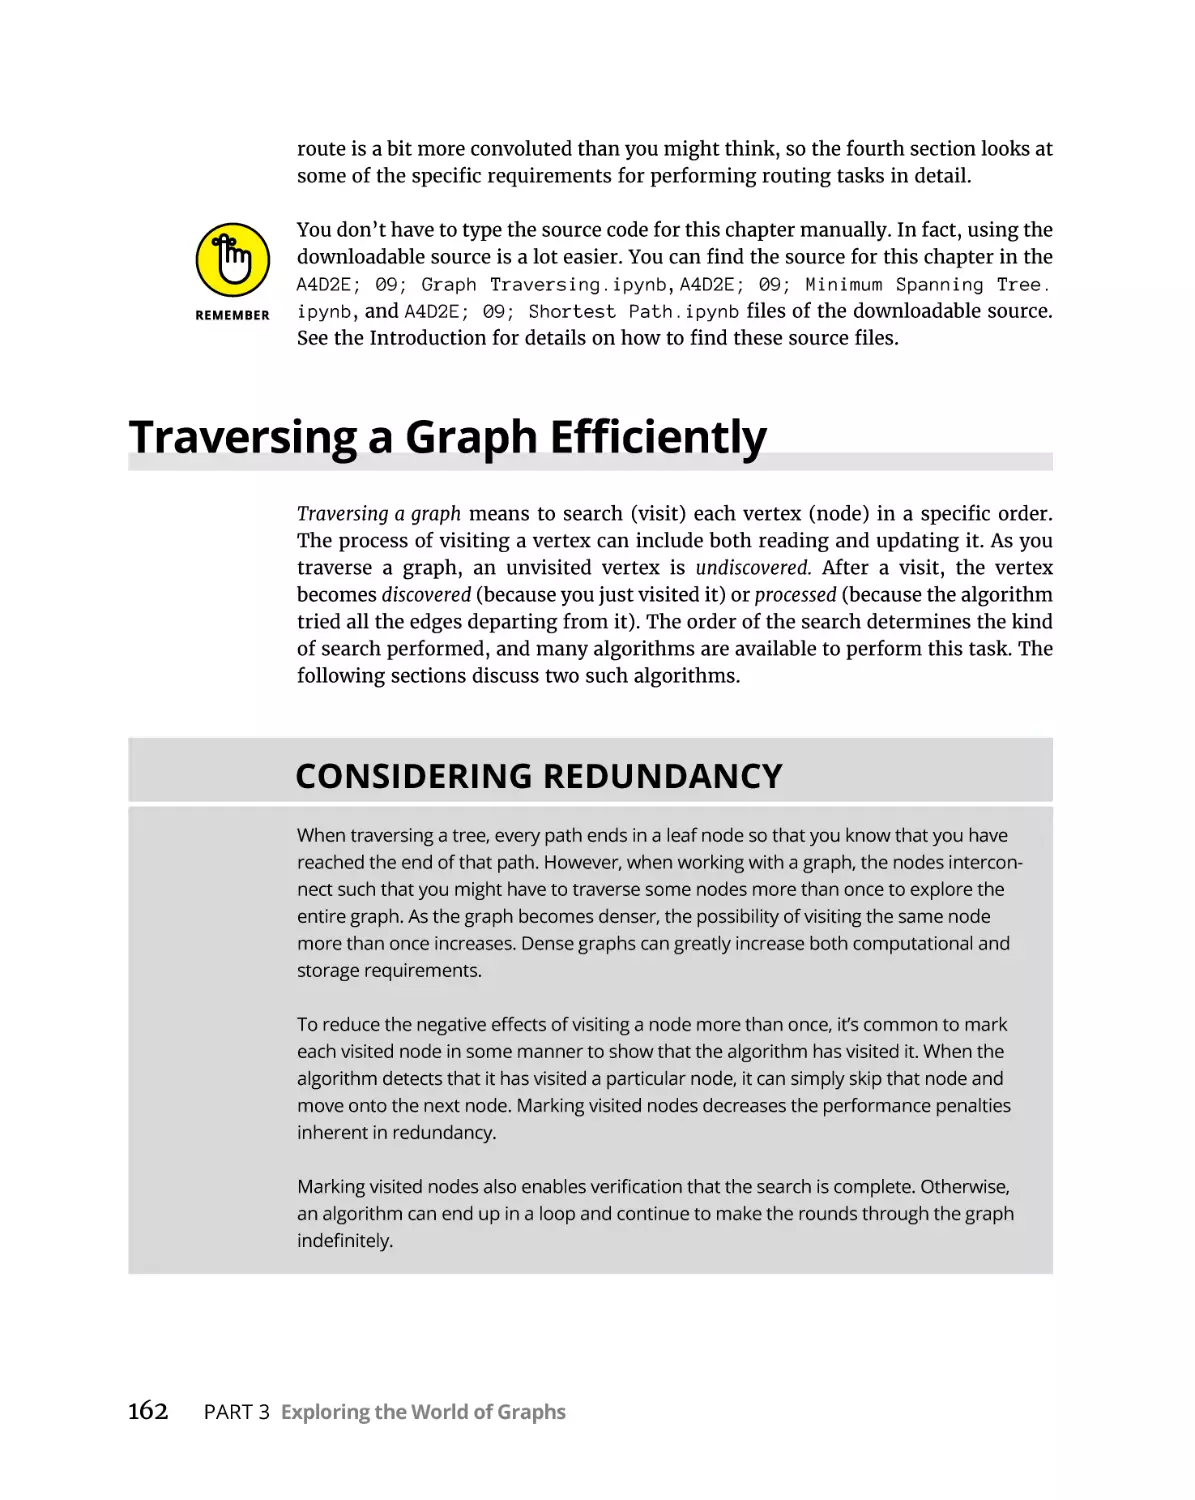 Traversing a Graph Efficiently